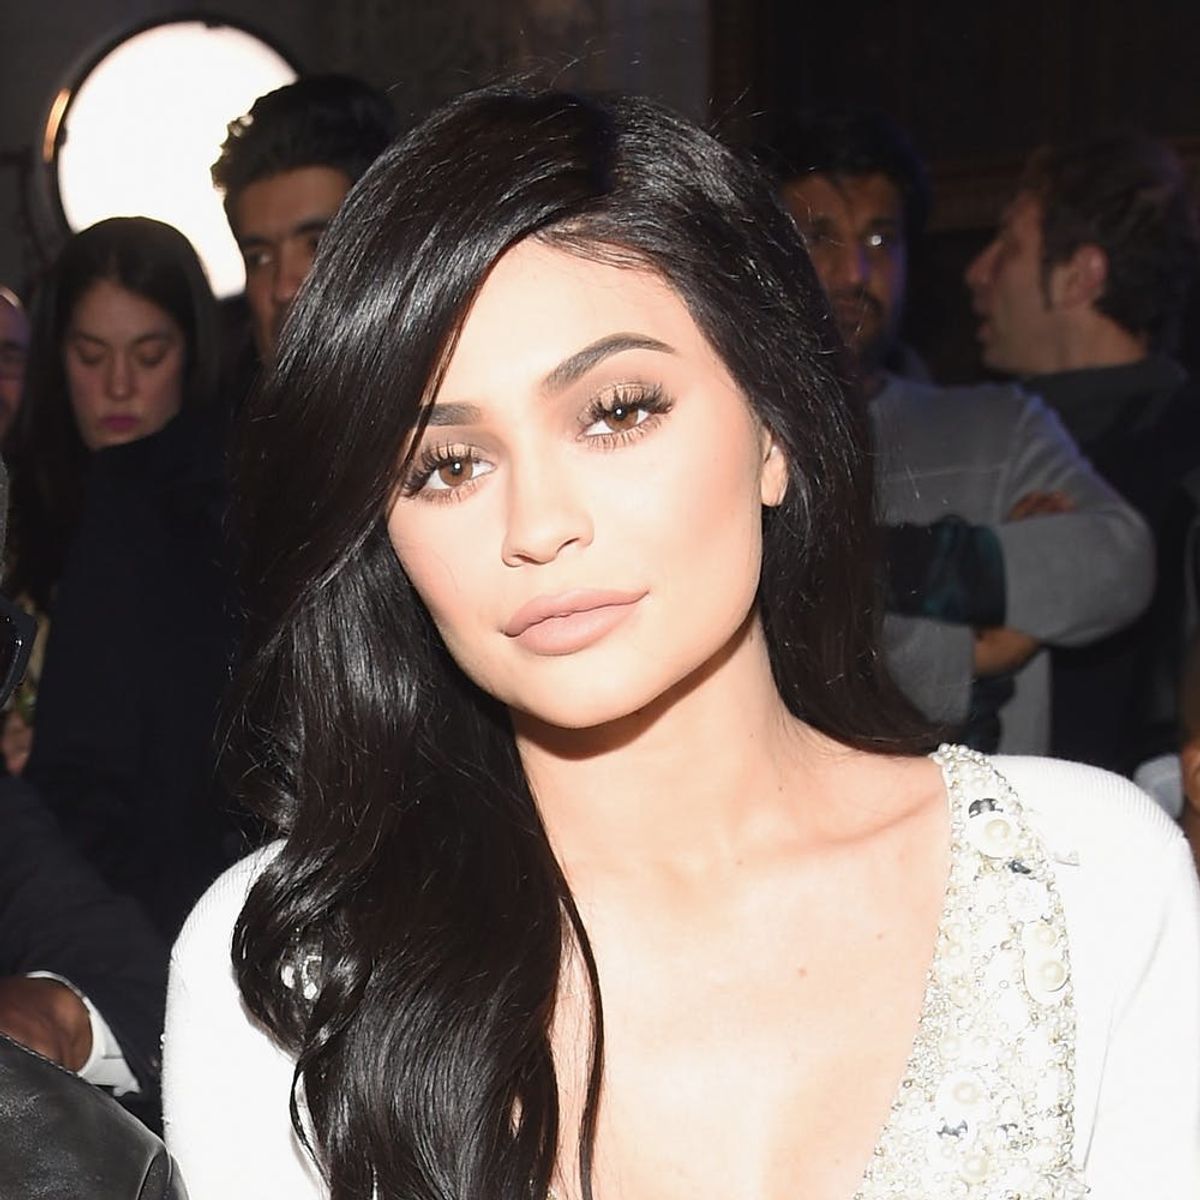 Kylie Jenner Just Made One Teen’s Prom Dreams Come True by Showing Up As His Date